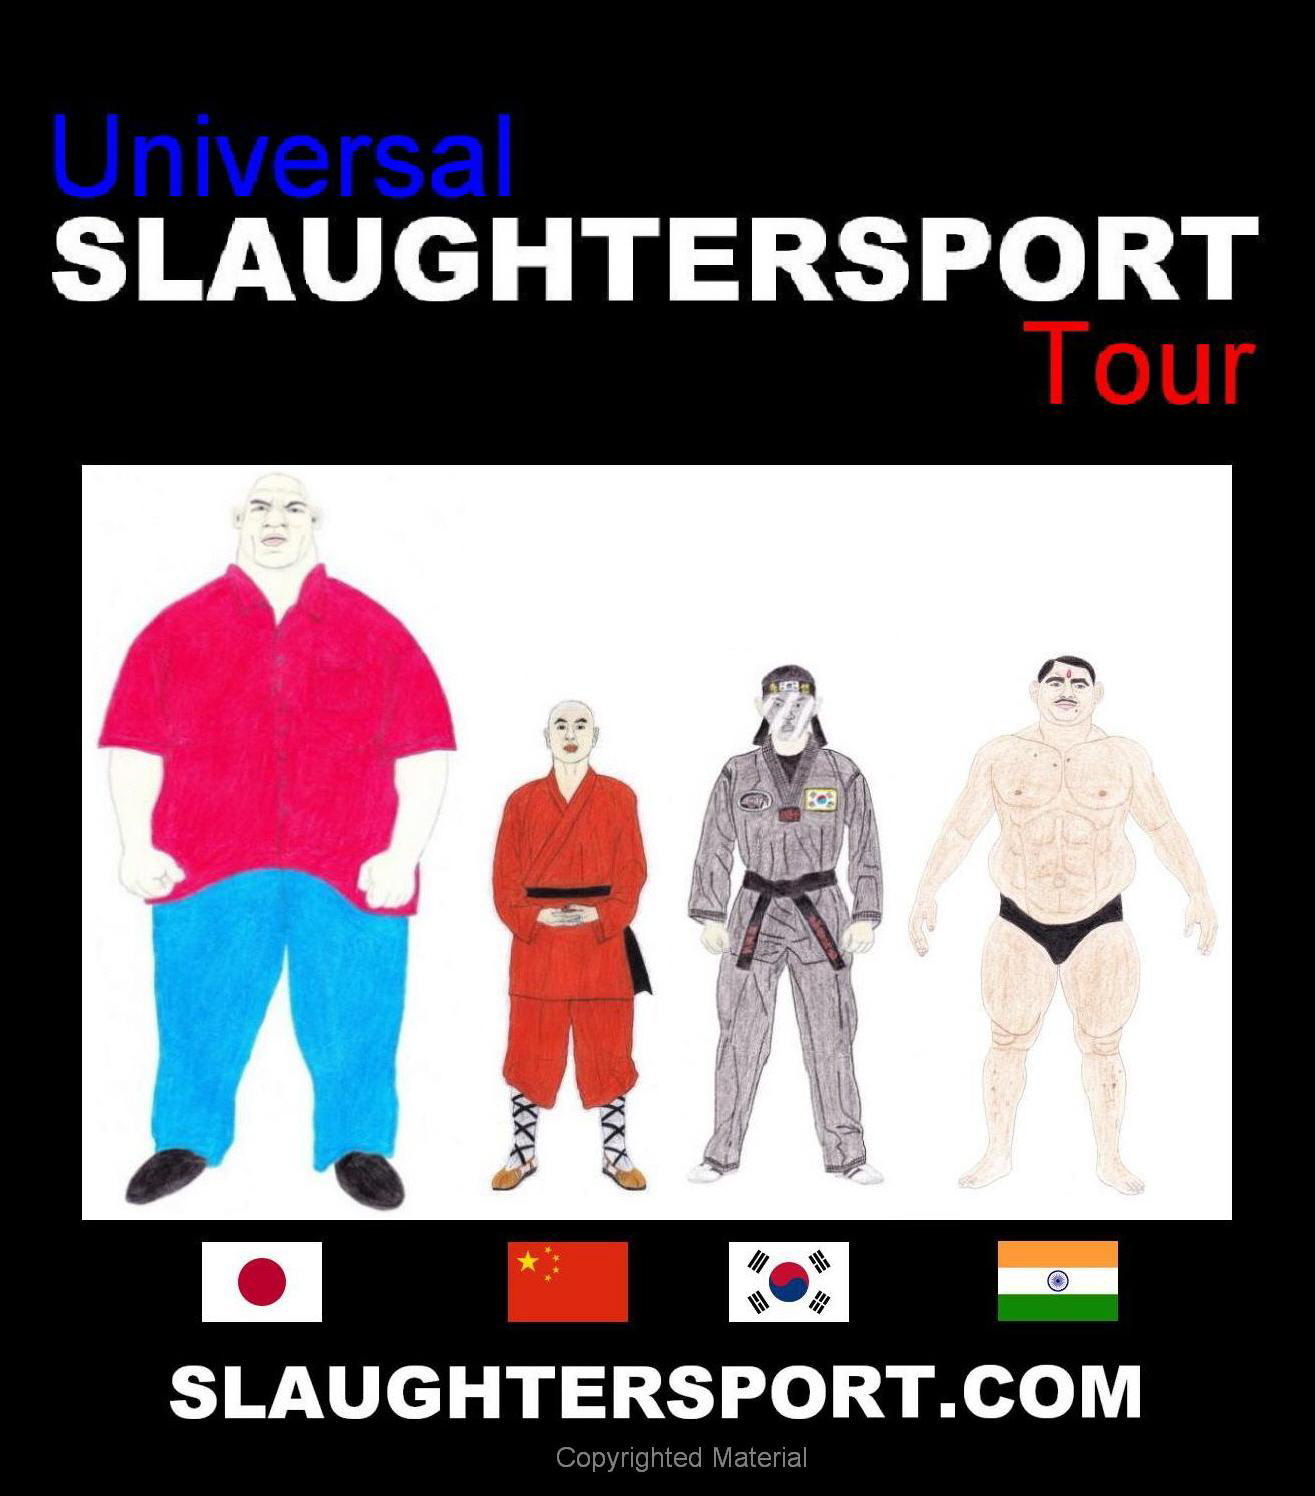 SLAUGHTERSPORT UST 3 – Asian Connection